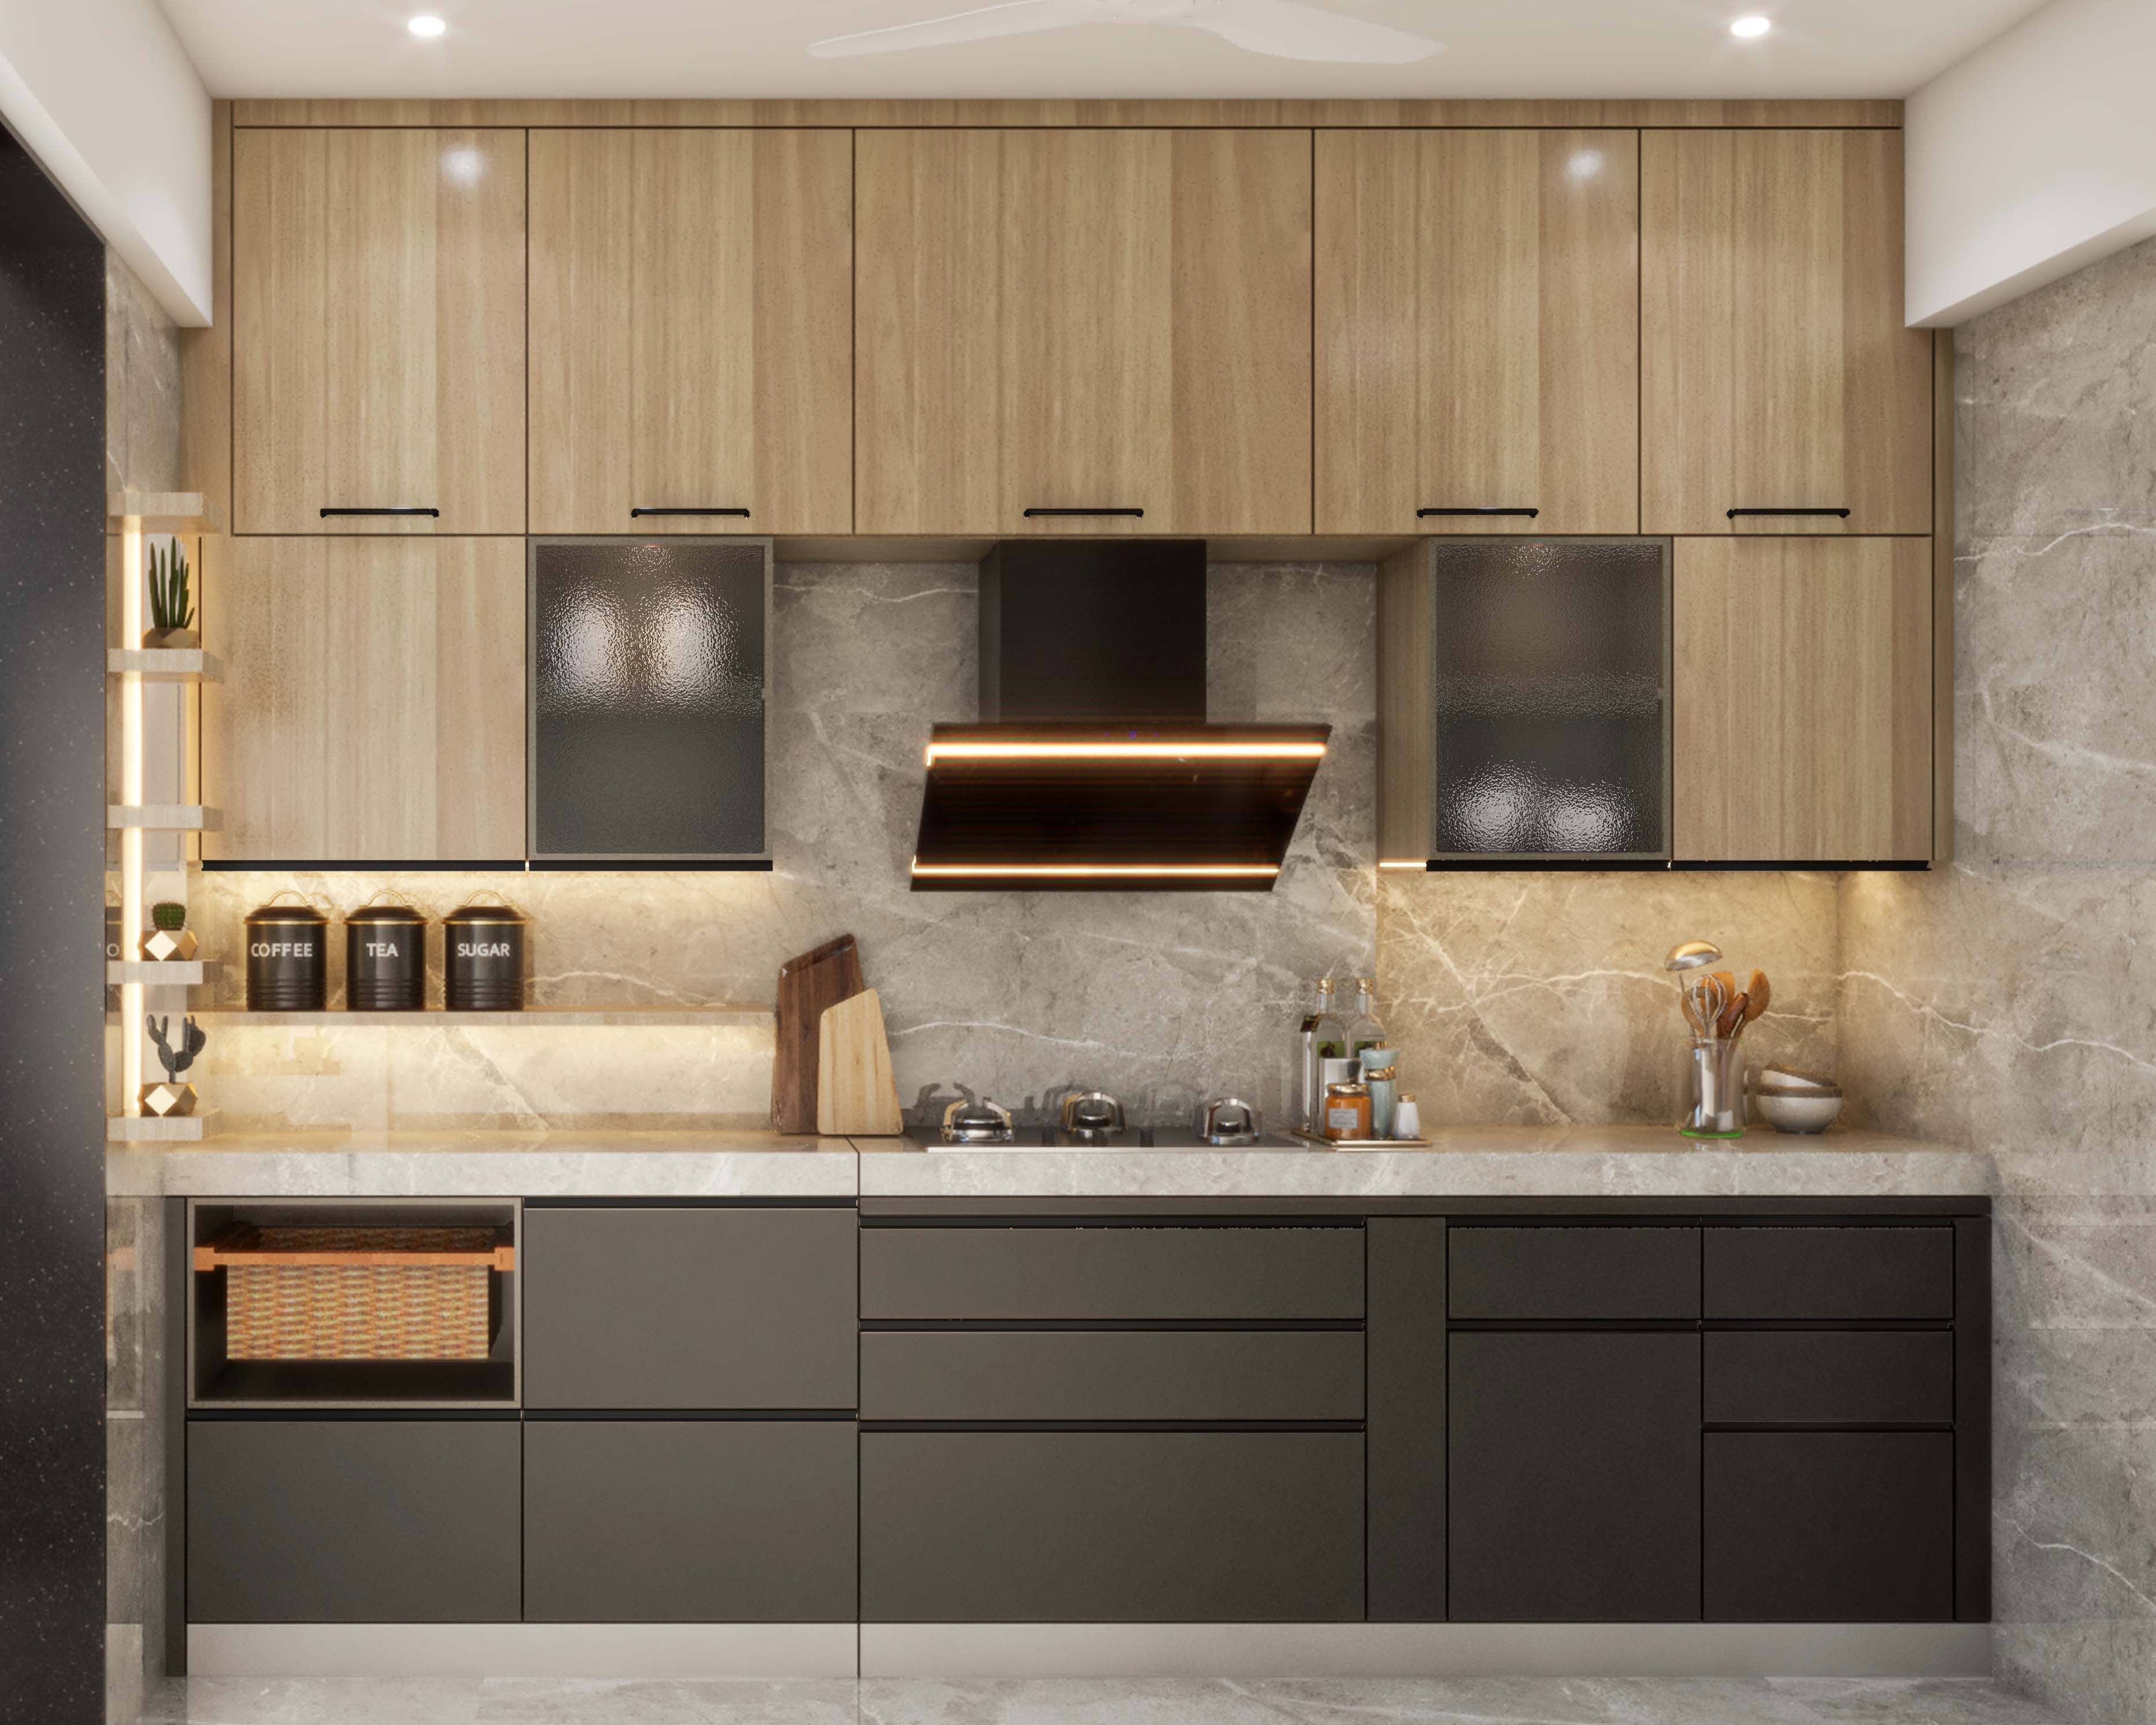 Modular Contemporary Wood And Grey Parallel Kitchen Design With Grey Marble Kitchen Backsplash